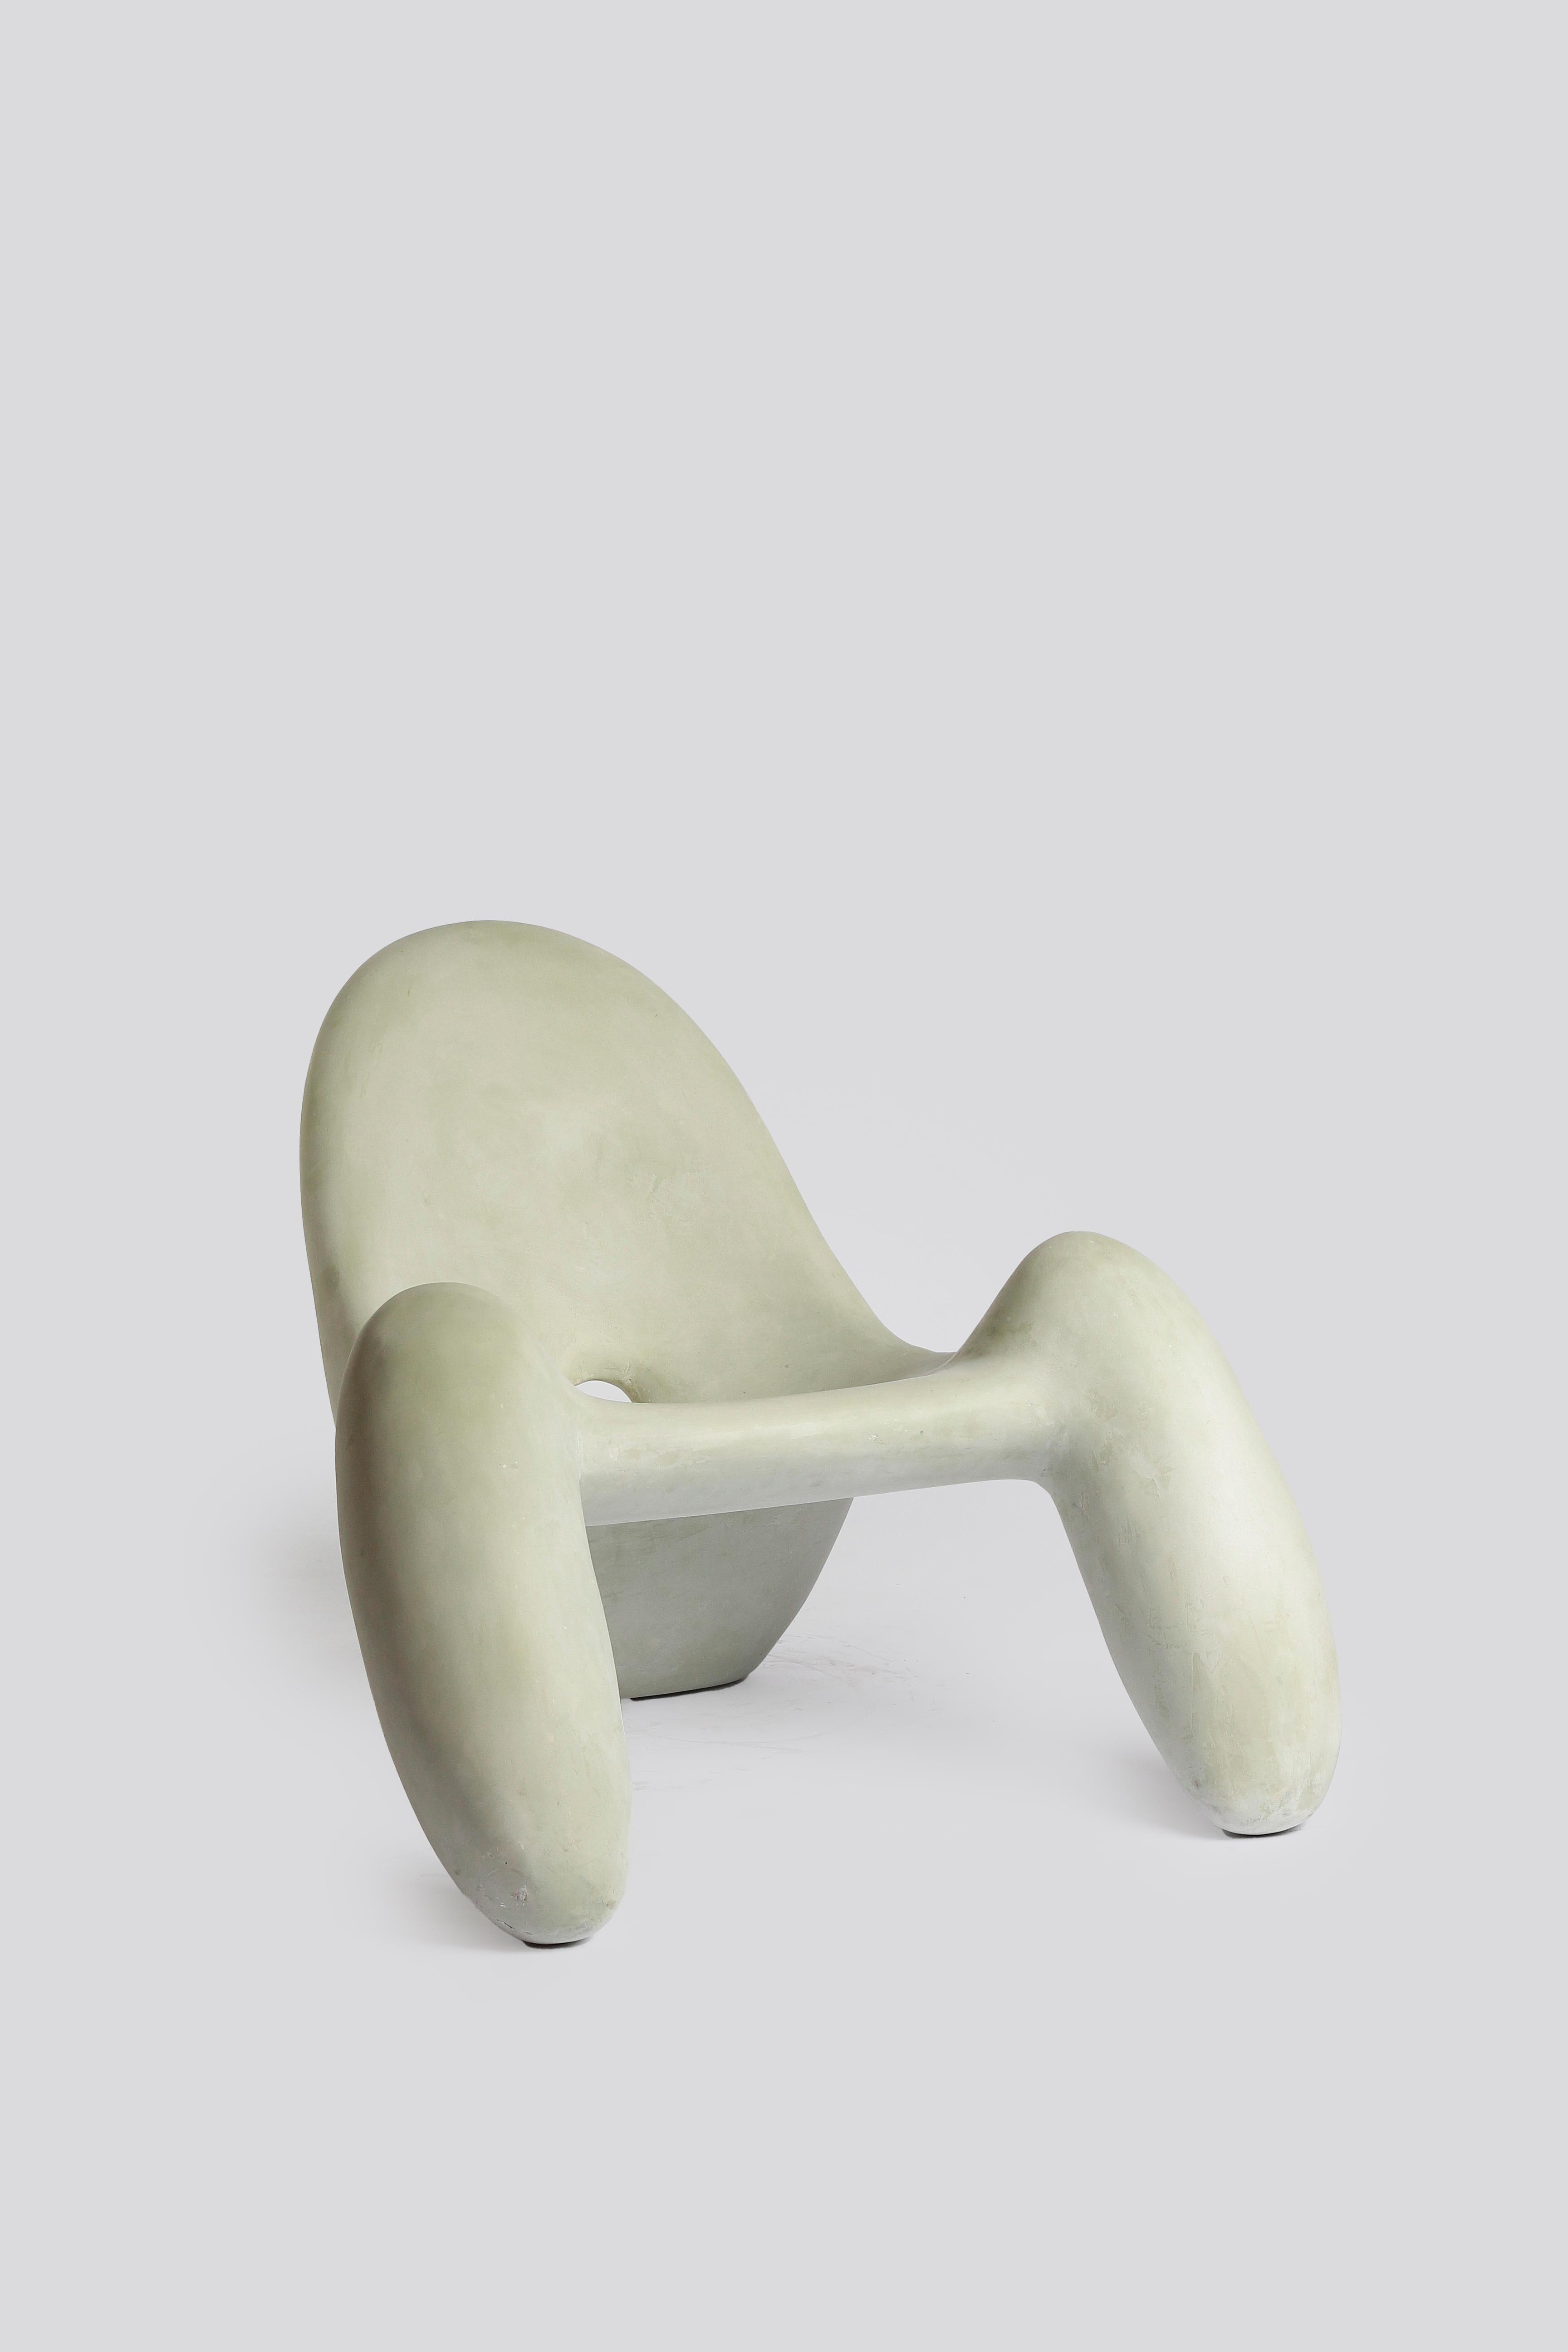 The Colo lounge chair is part of p collection and results from several sculptural essays with spherical volumes as their starting point, exploring possible variations from this initial form. These exercises were initially developed manually in clay